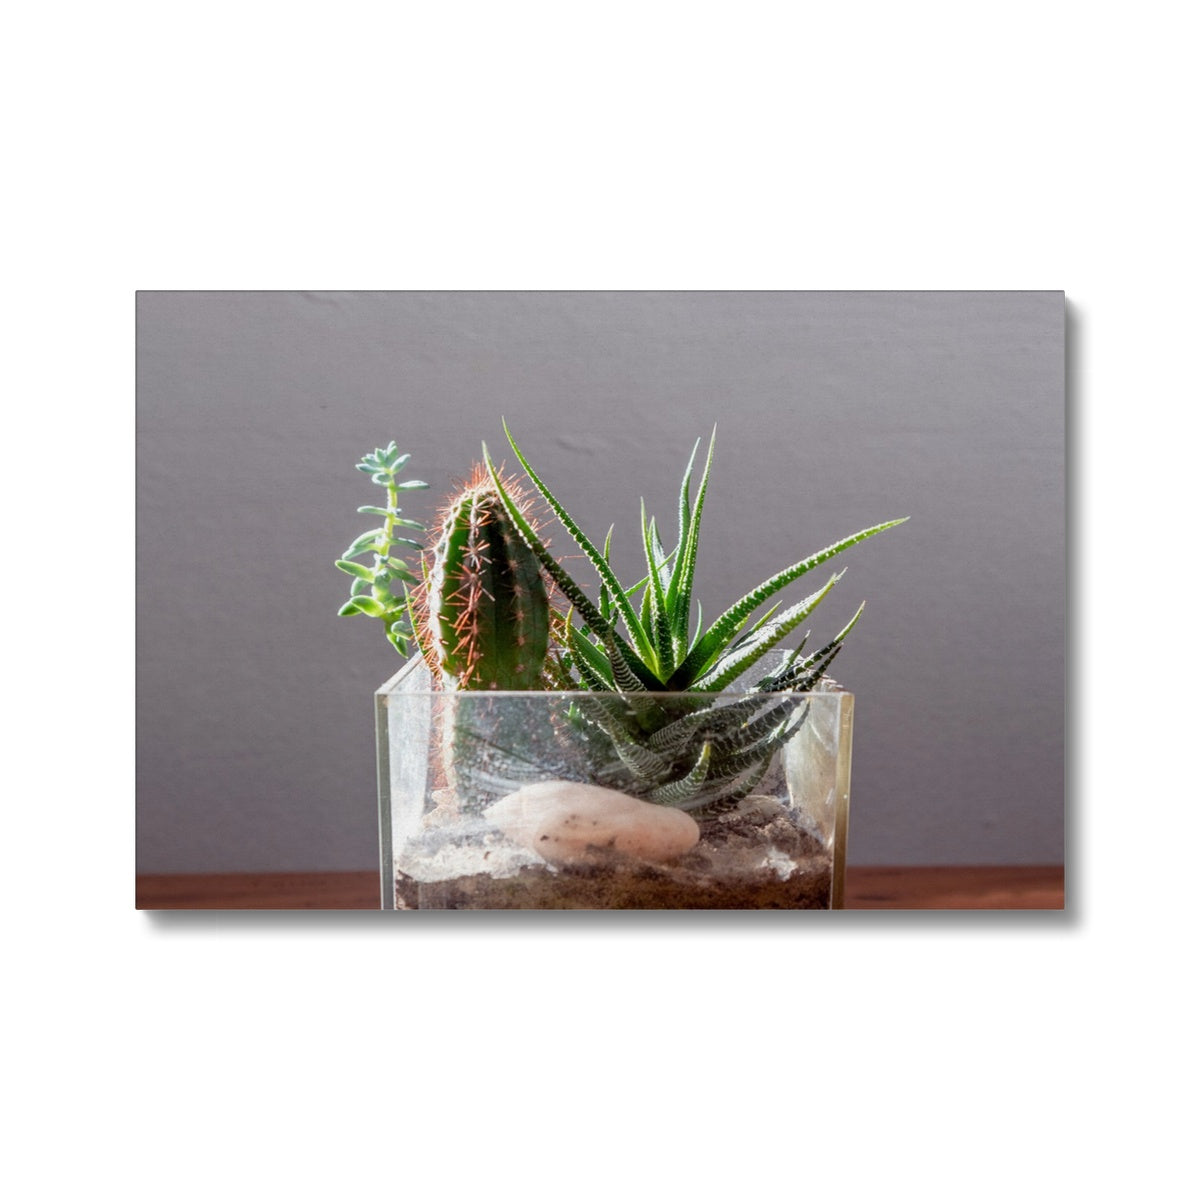 Soothing Cactus Palett Canvas